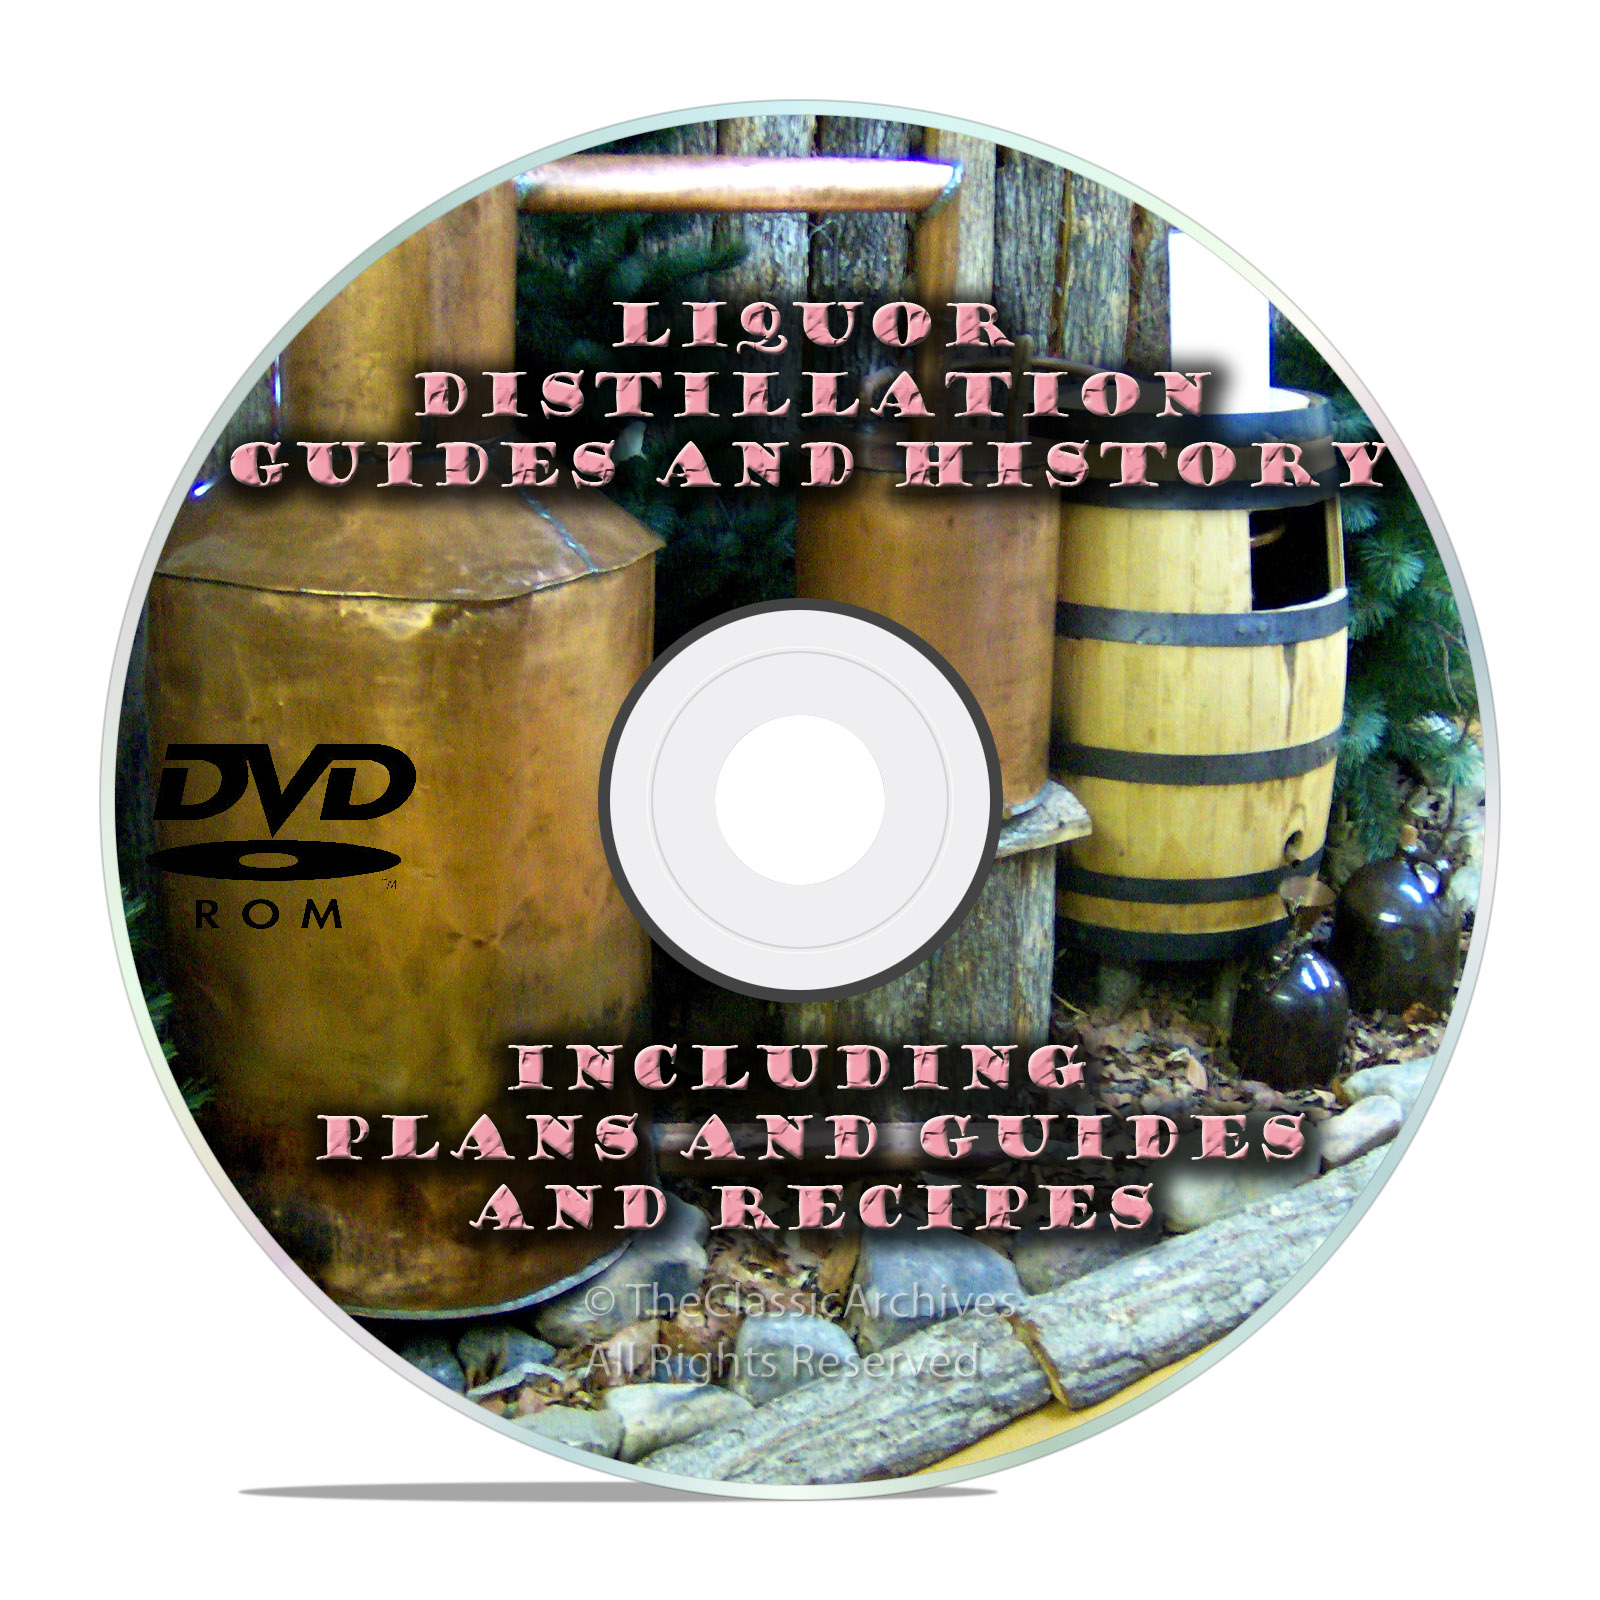 The Complete Distiller, Moonshine Still Plans and Guides on DVD